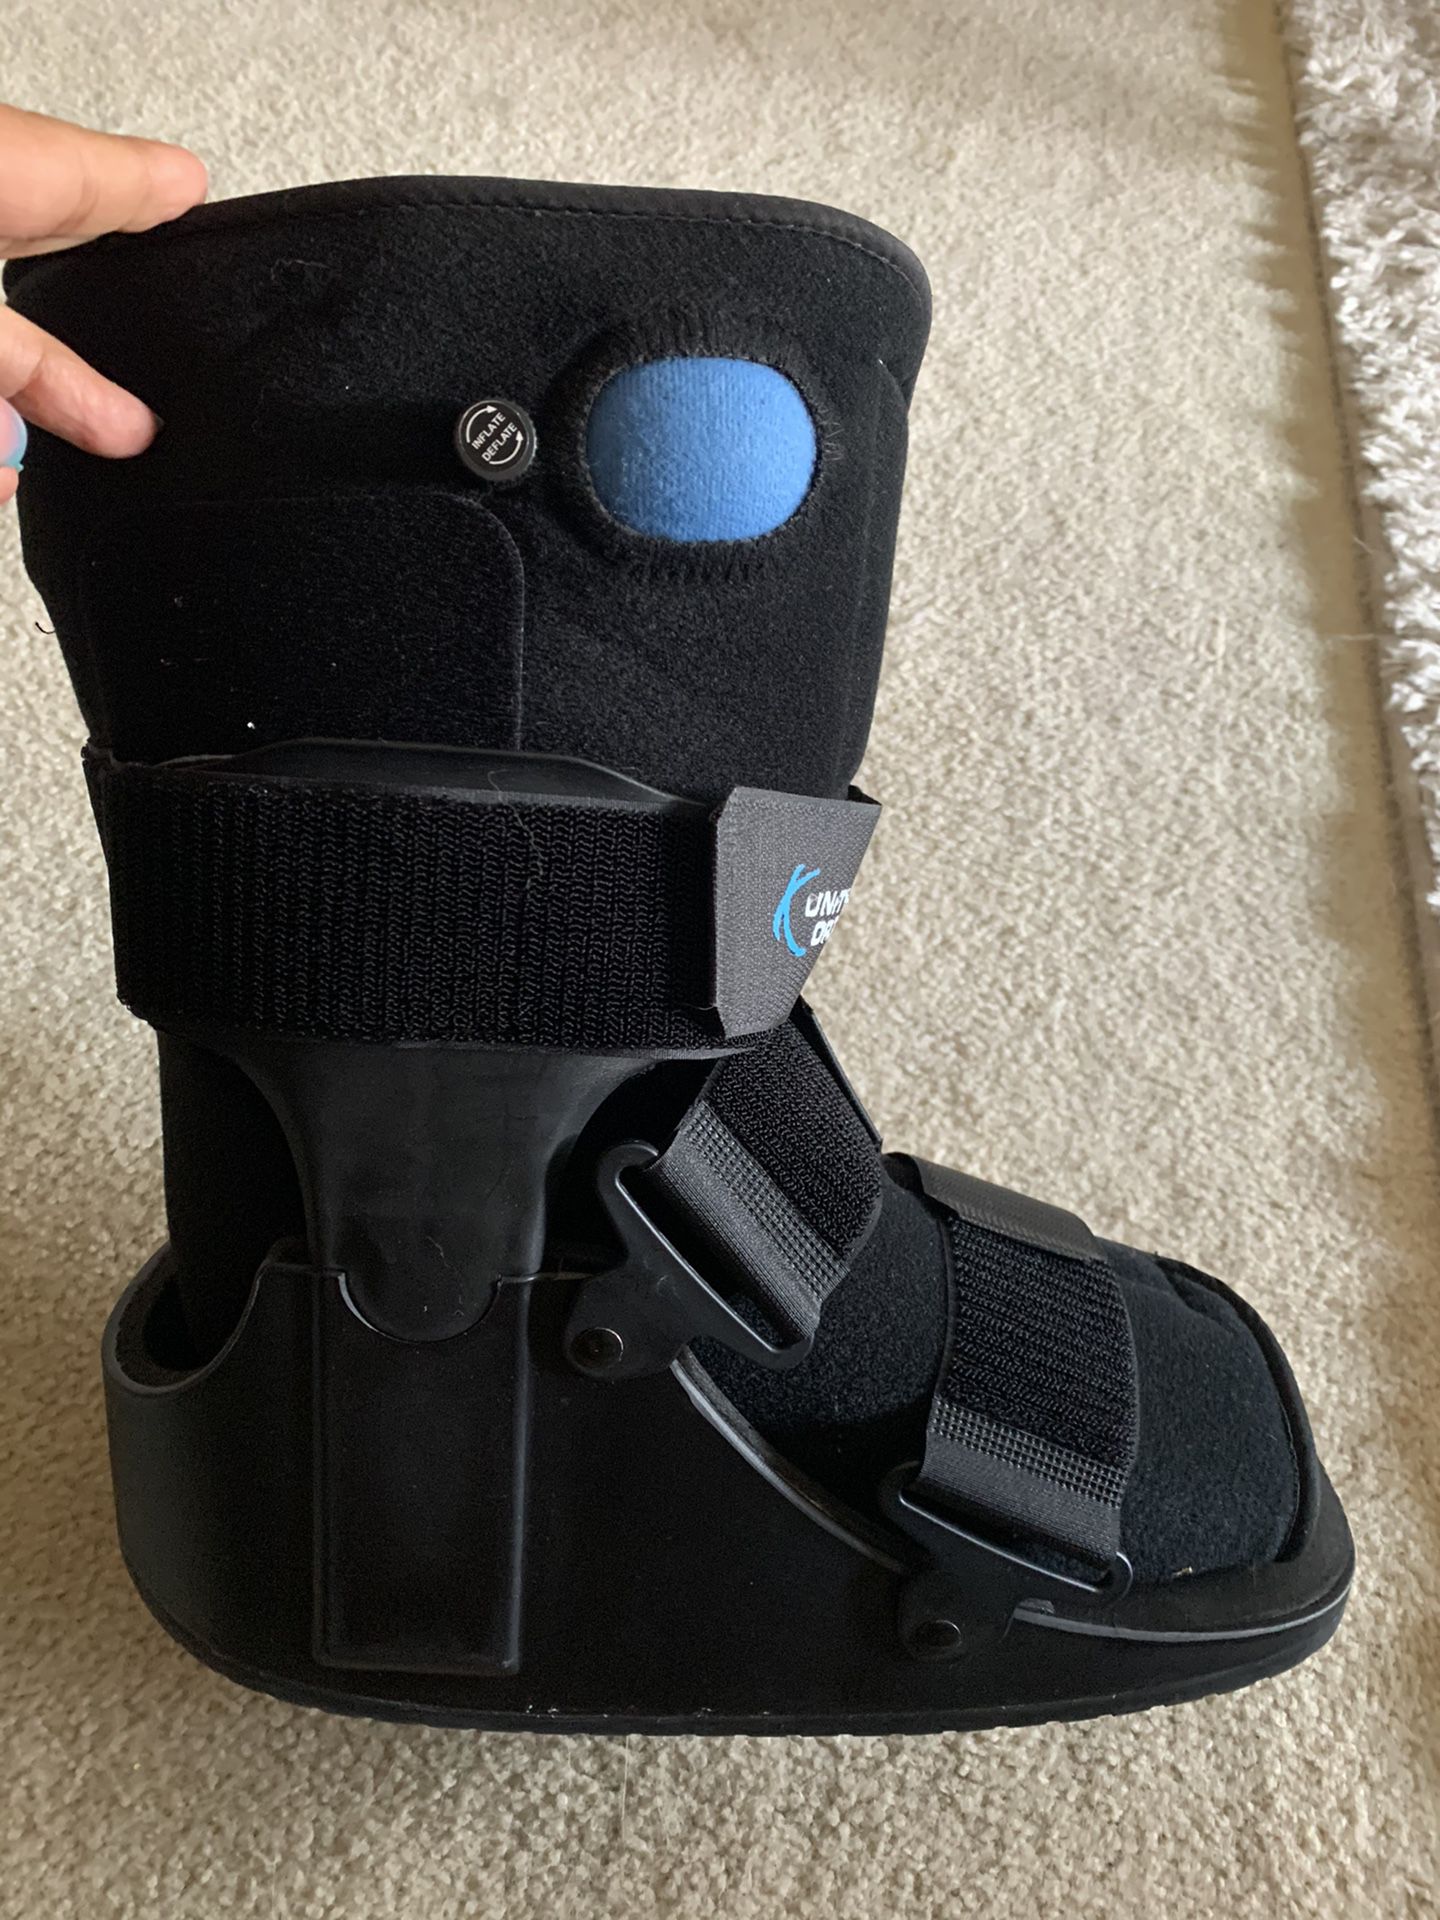 Ortho/Cam boot